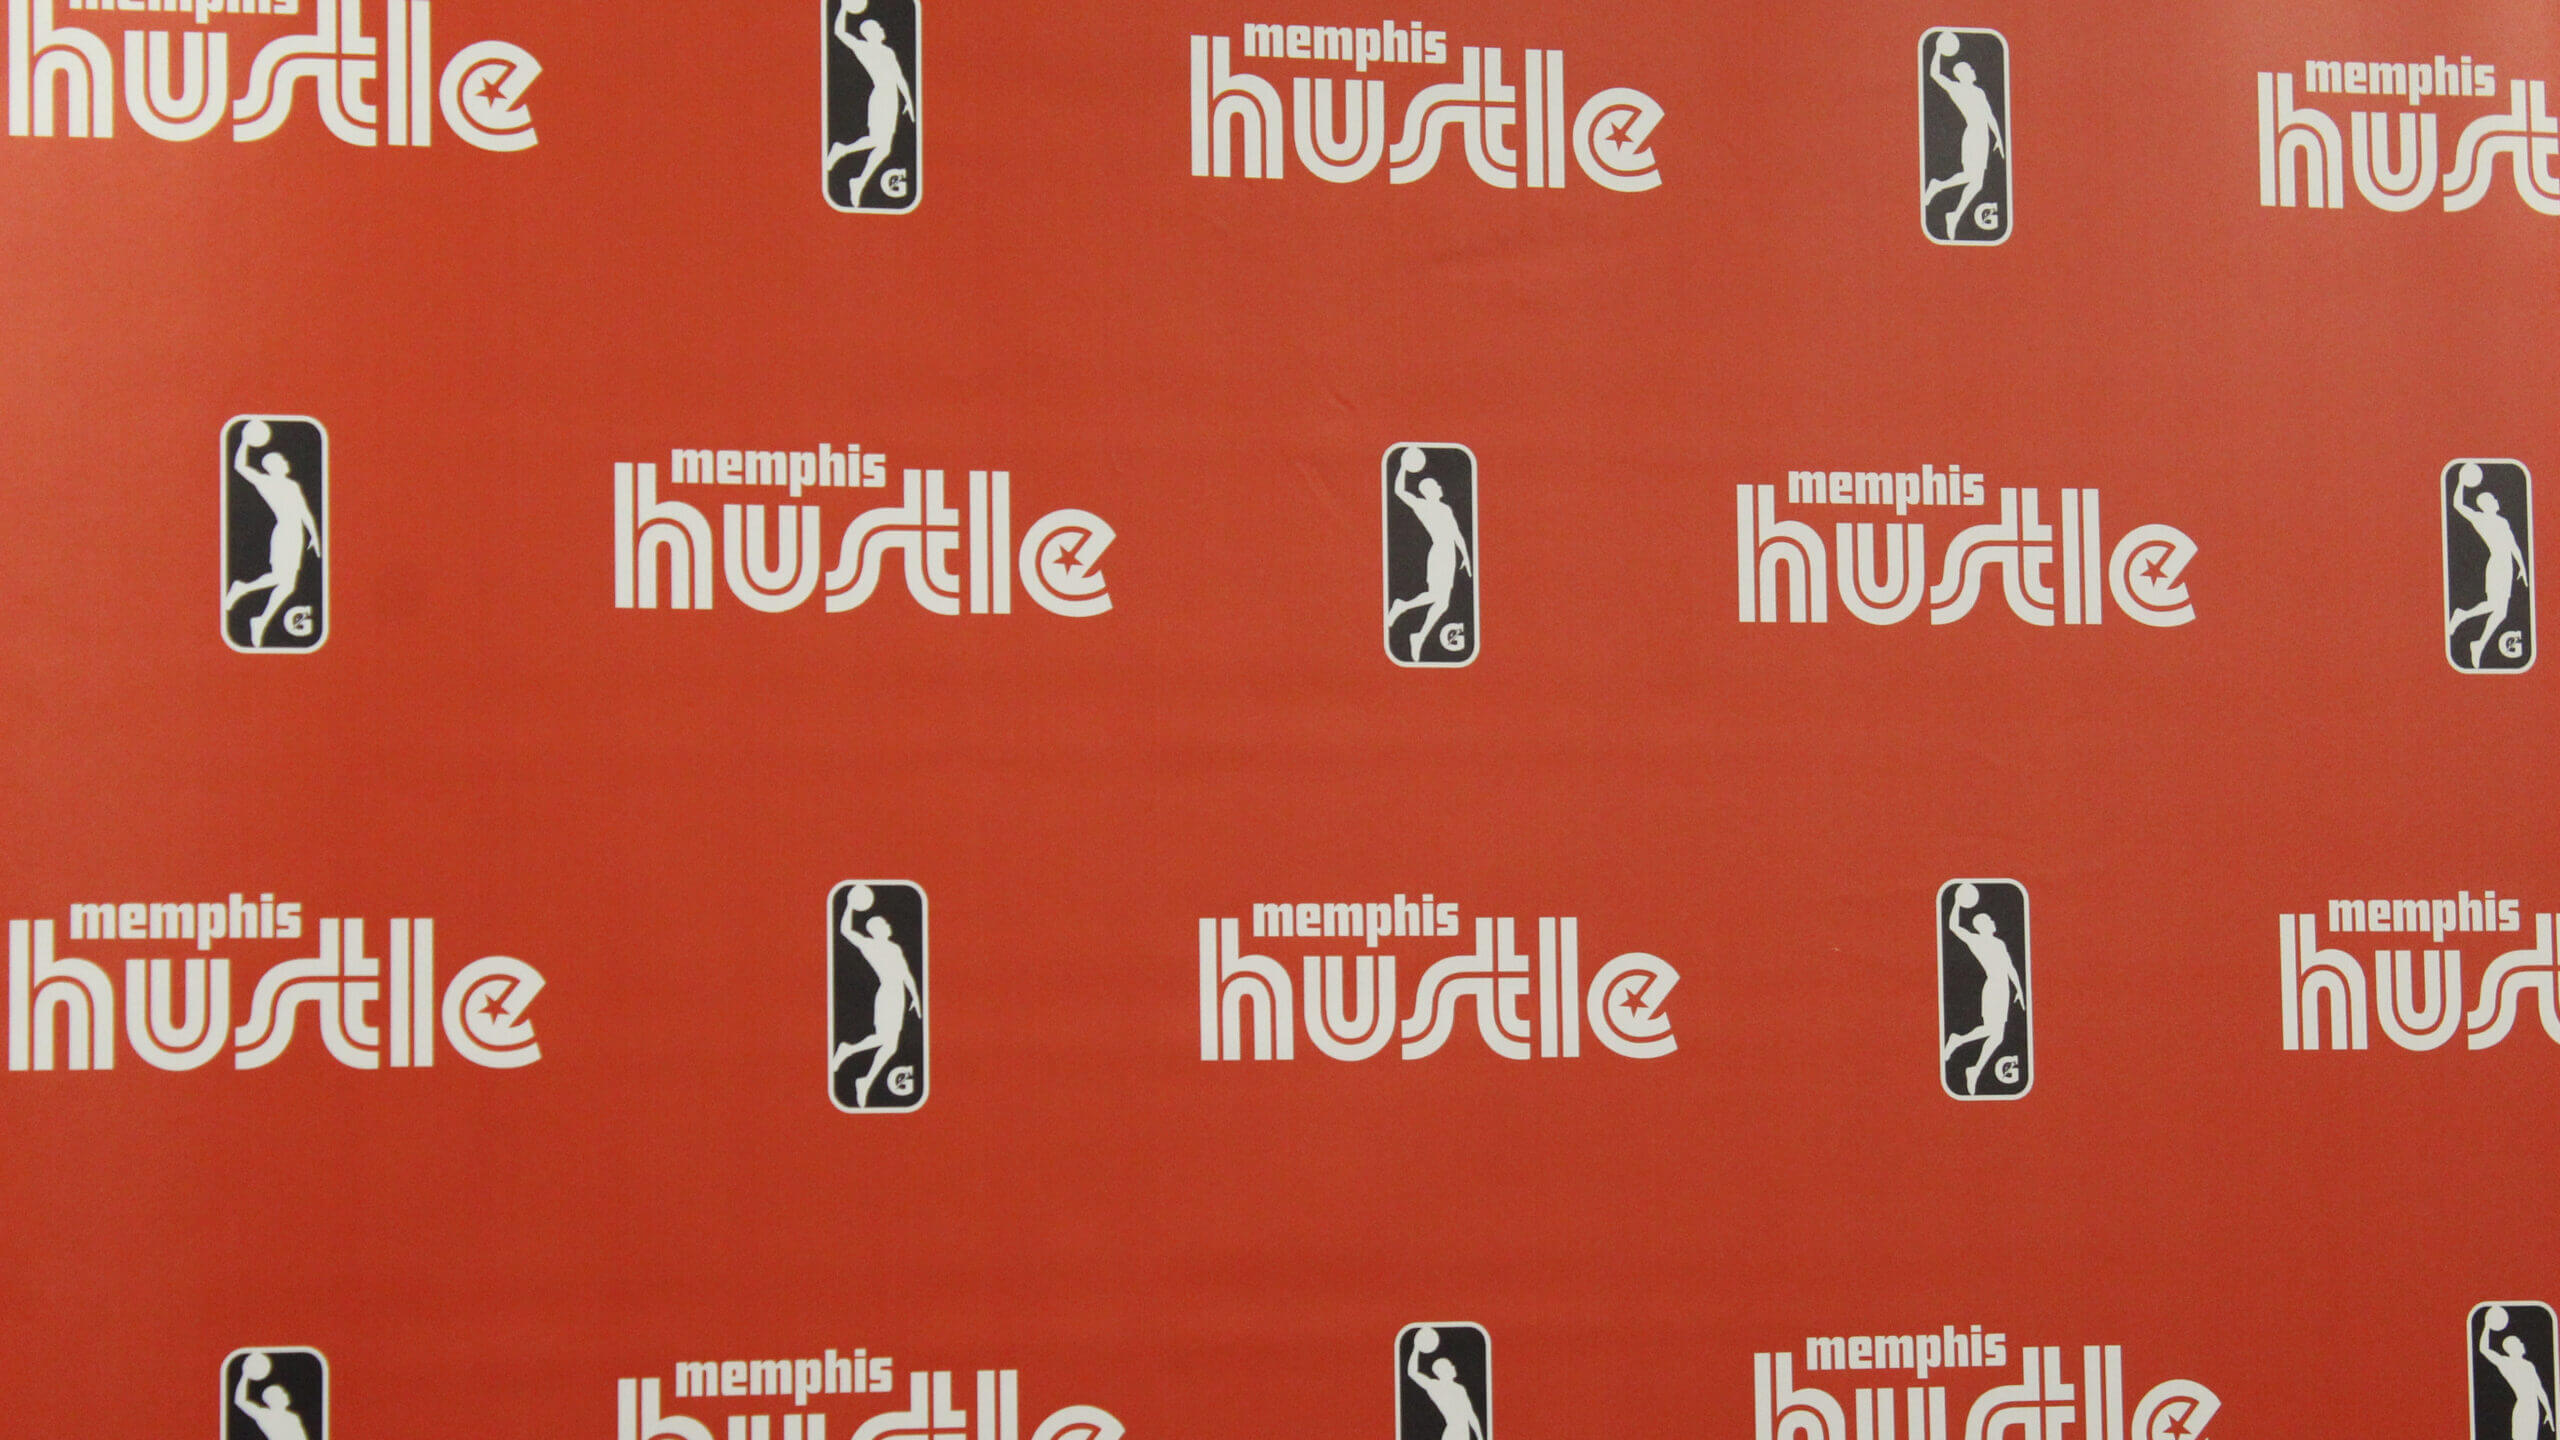 Hustle single-game ticket sales and promo schedule released